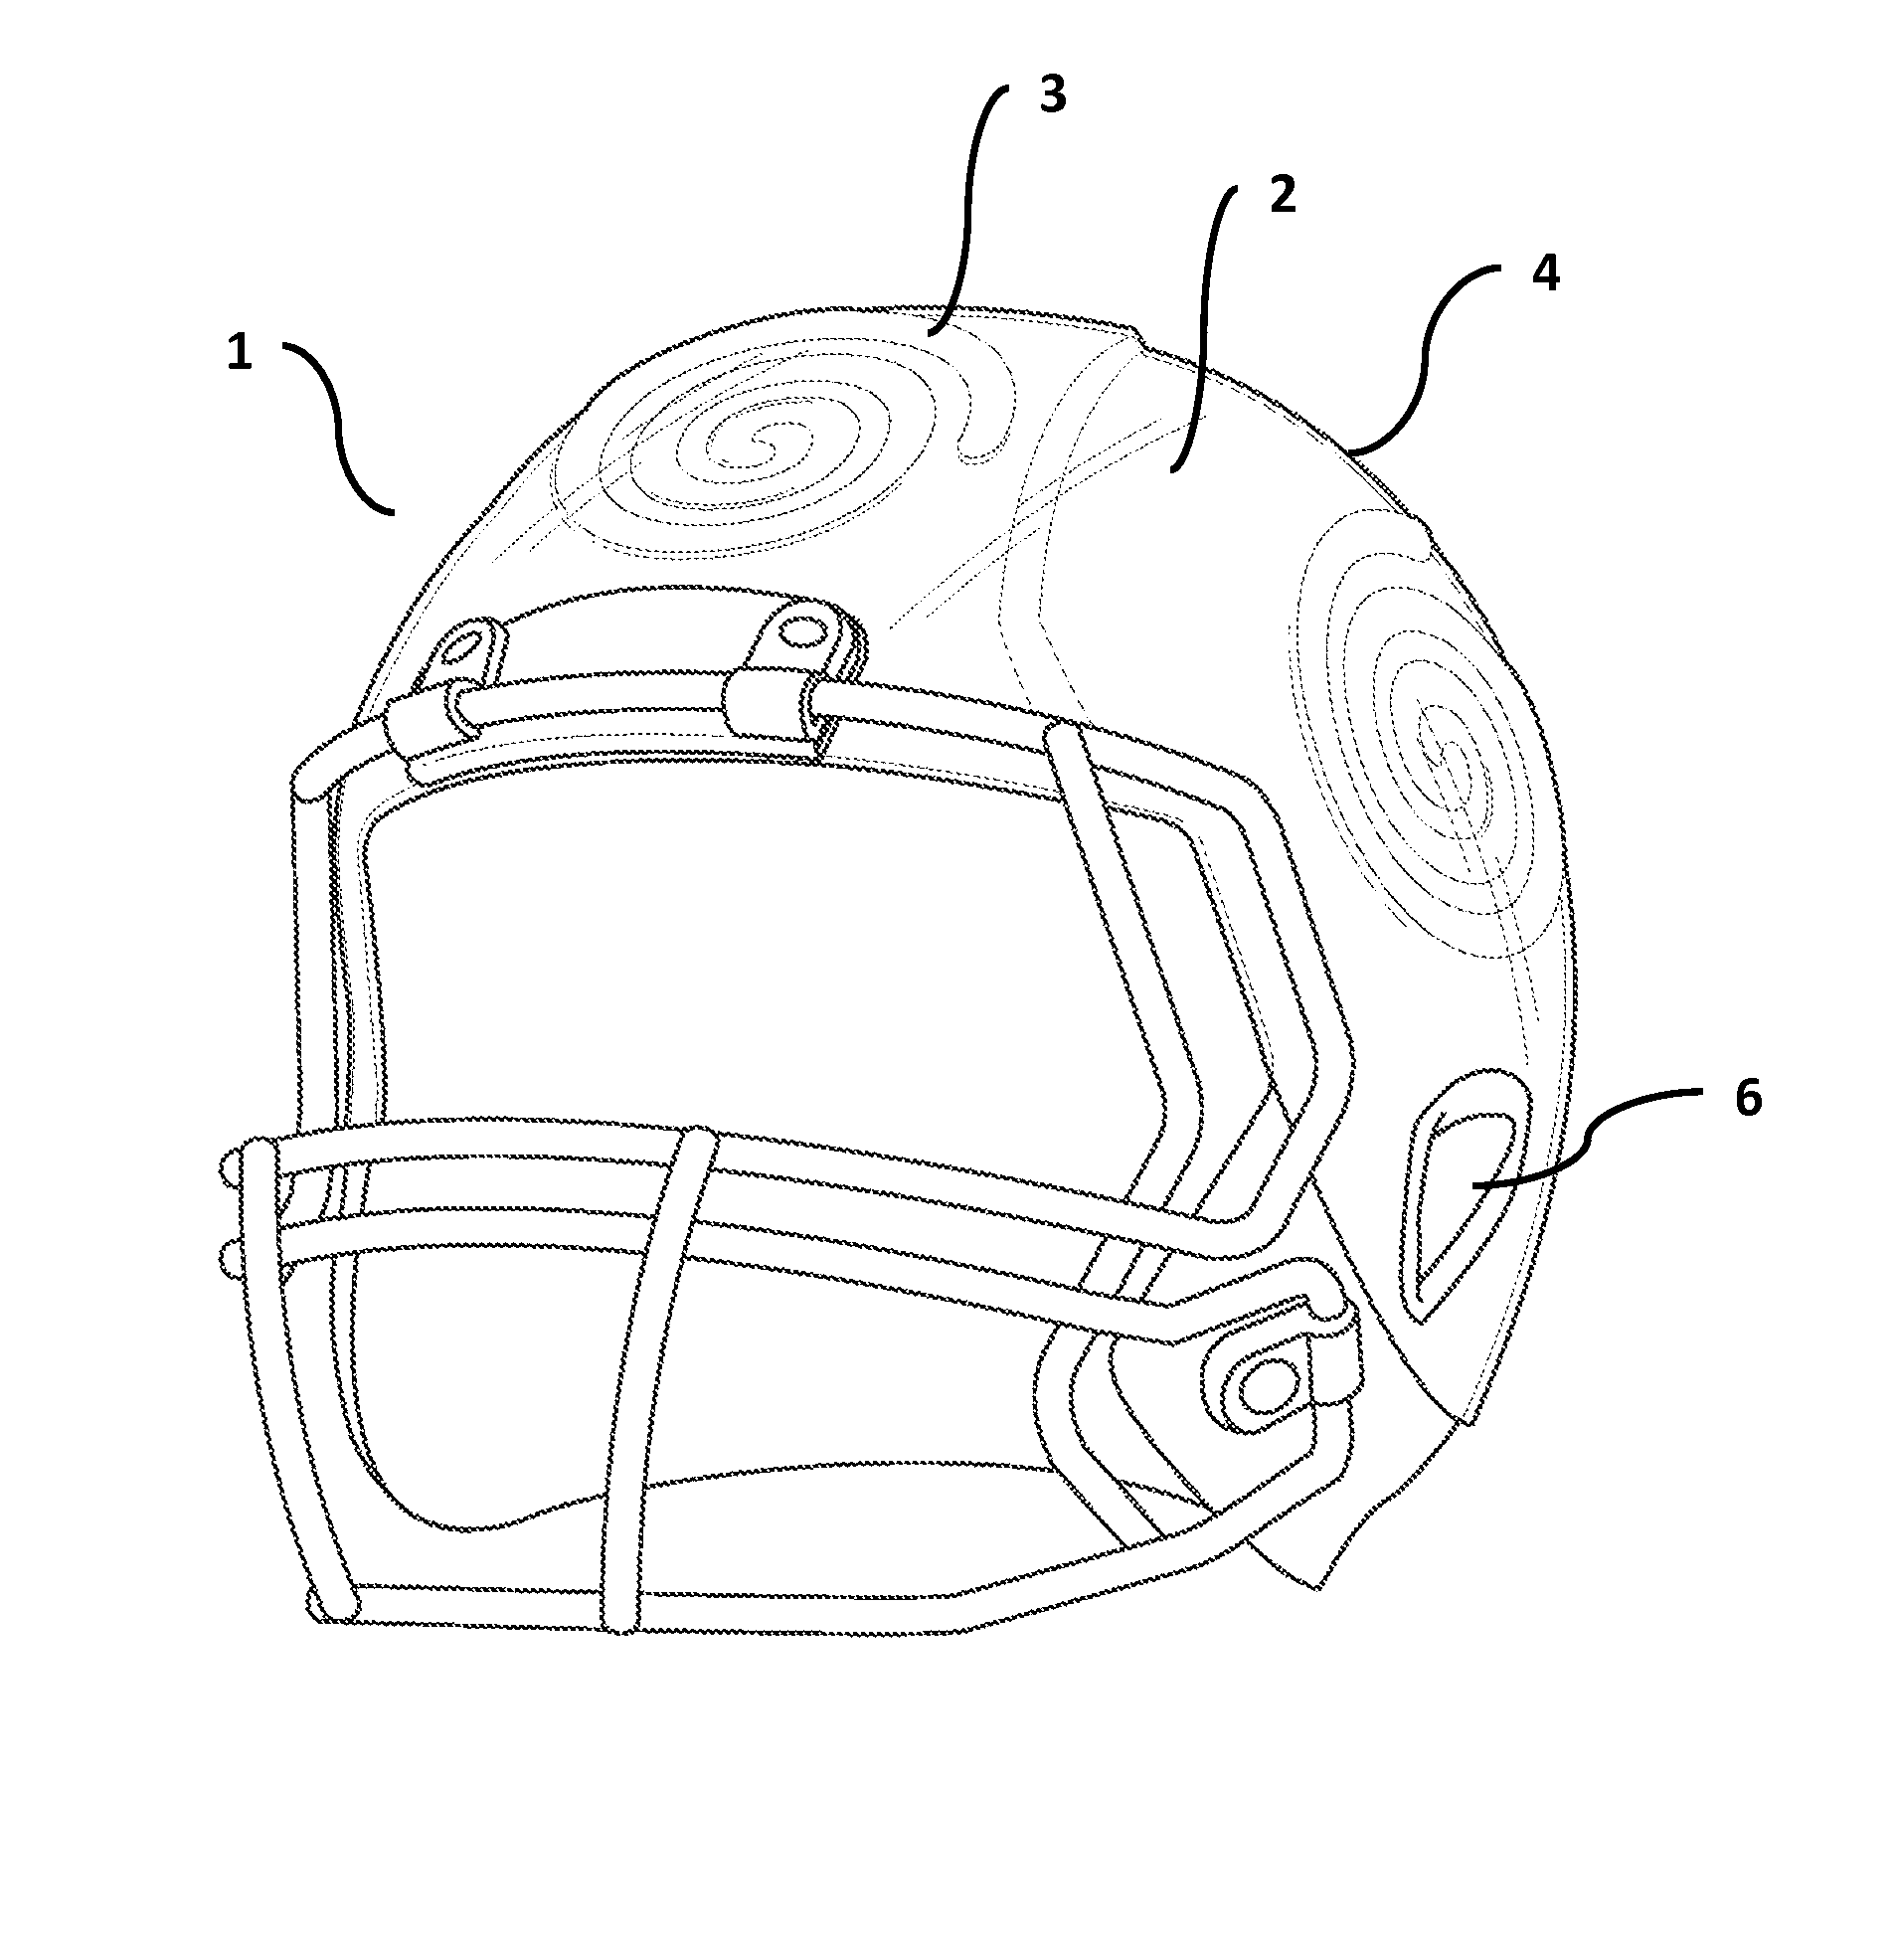 Helmet for reducing concussive forces during collision